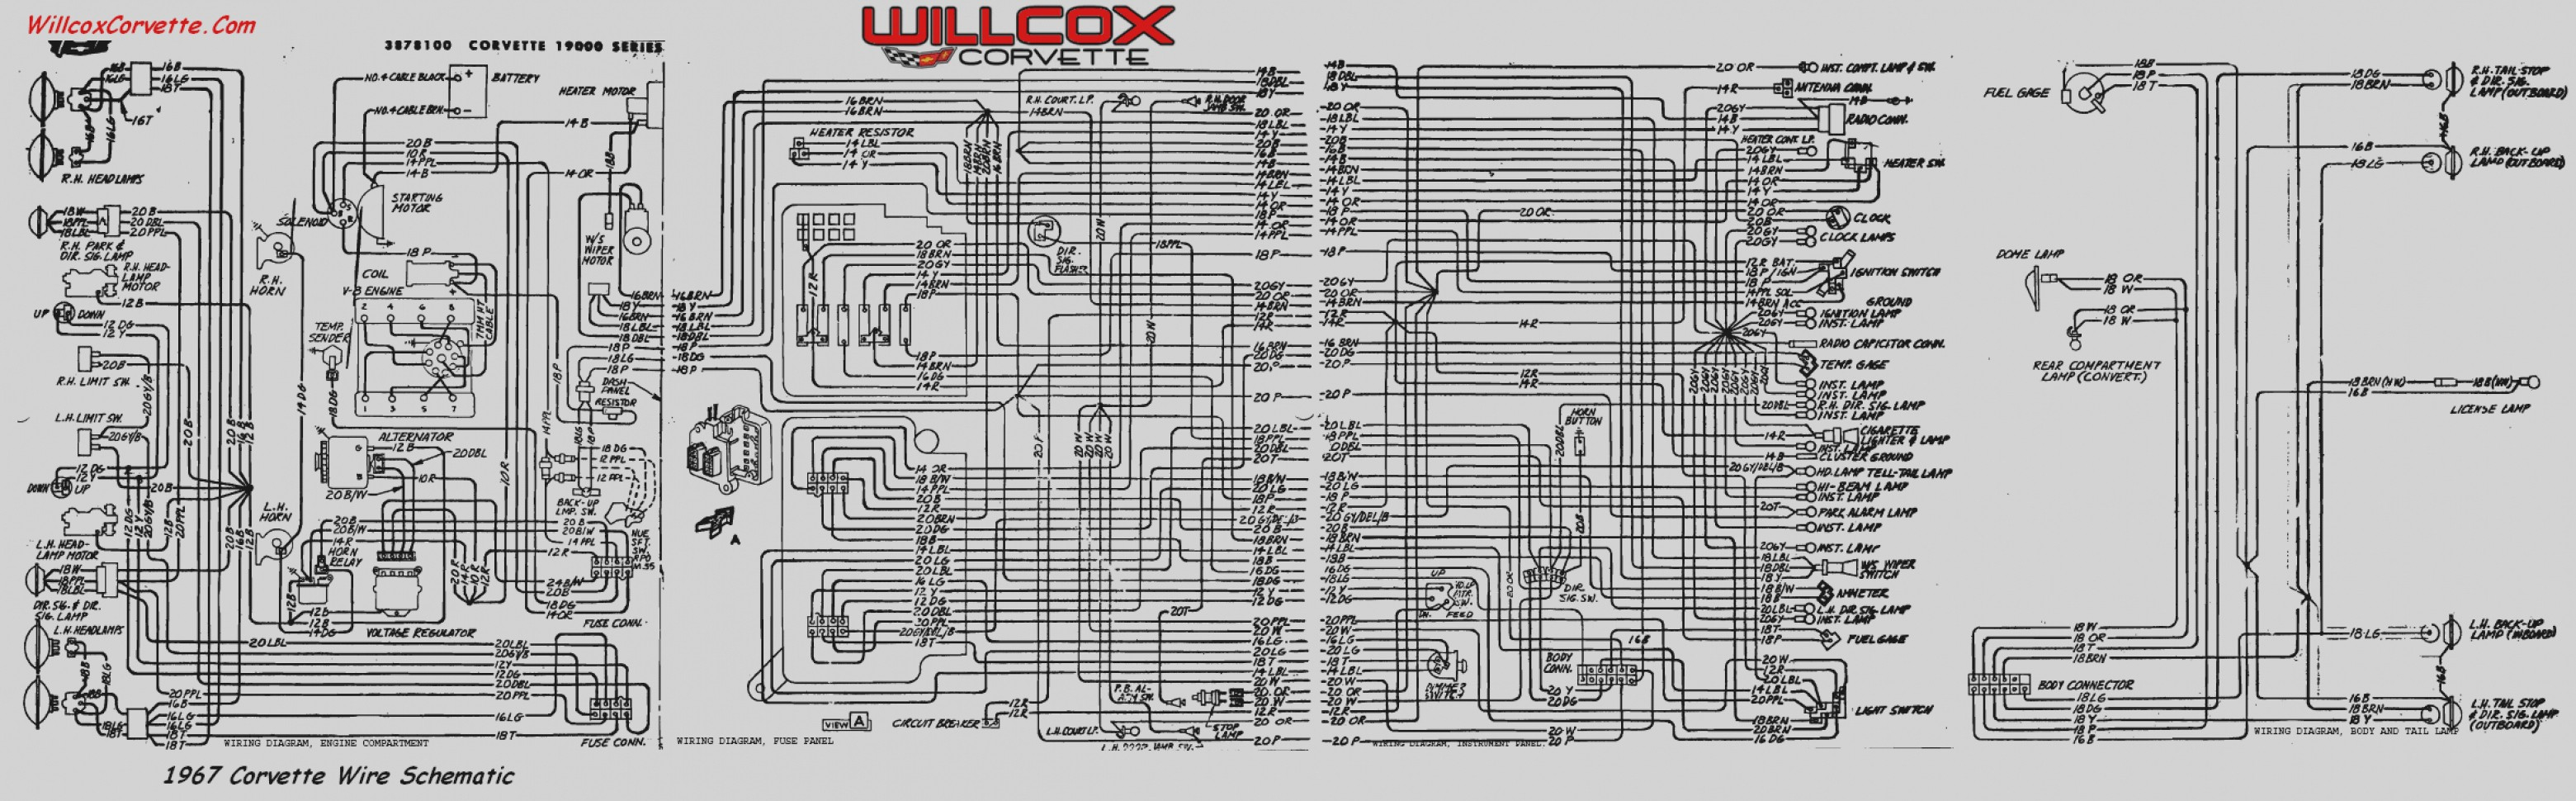 Passkey 3 Bypass Diagram Diagram Of A 94 Corvette Engine Wiring Diagrams Name